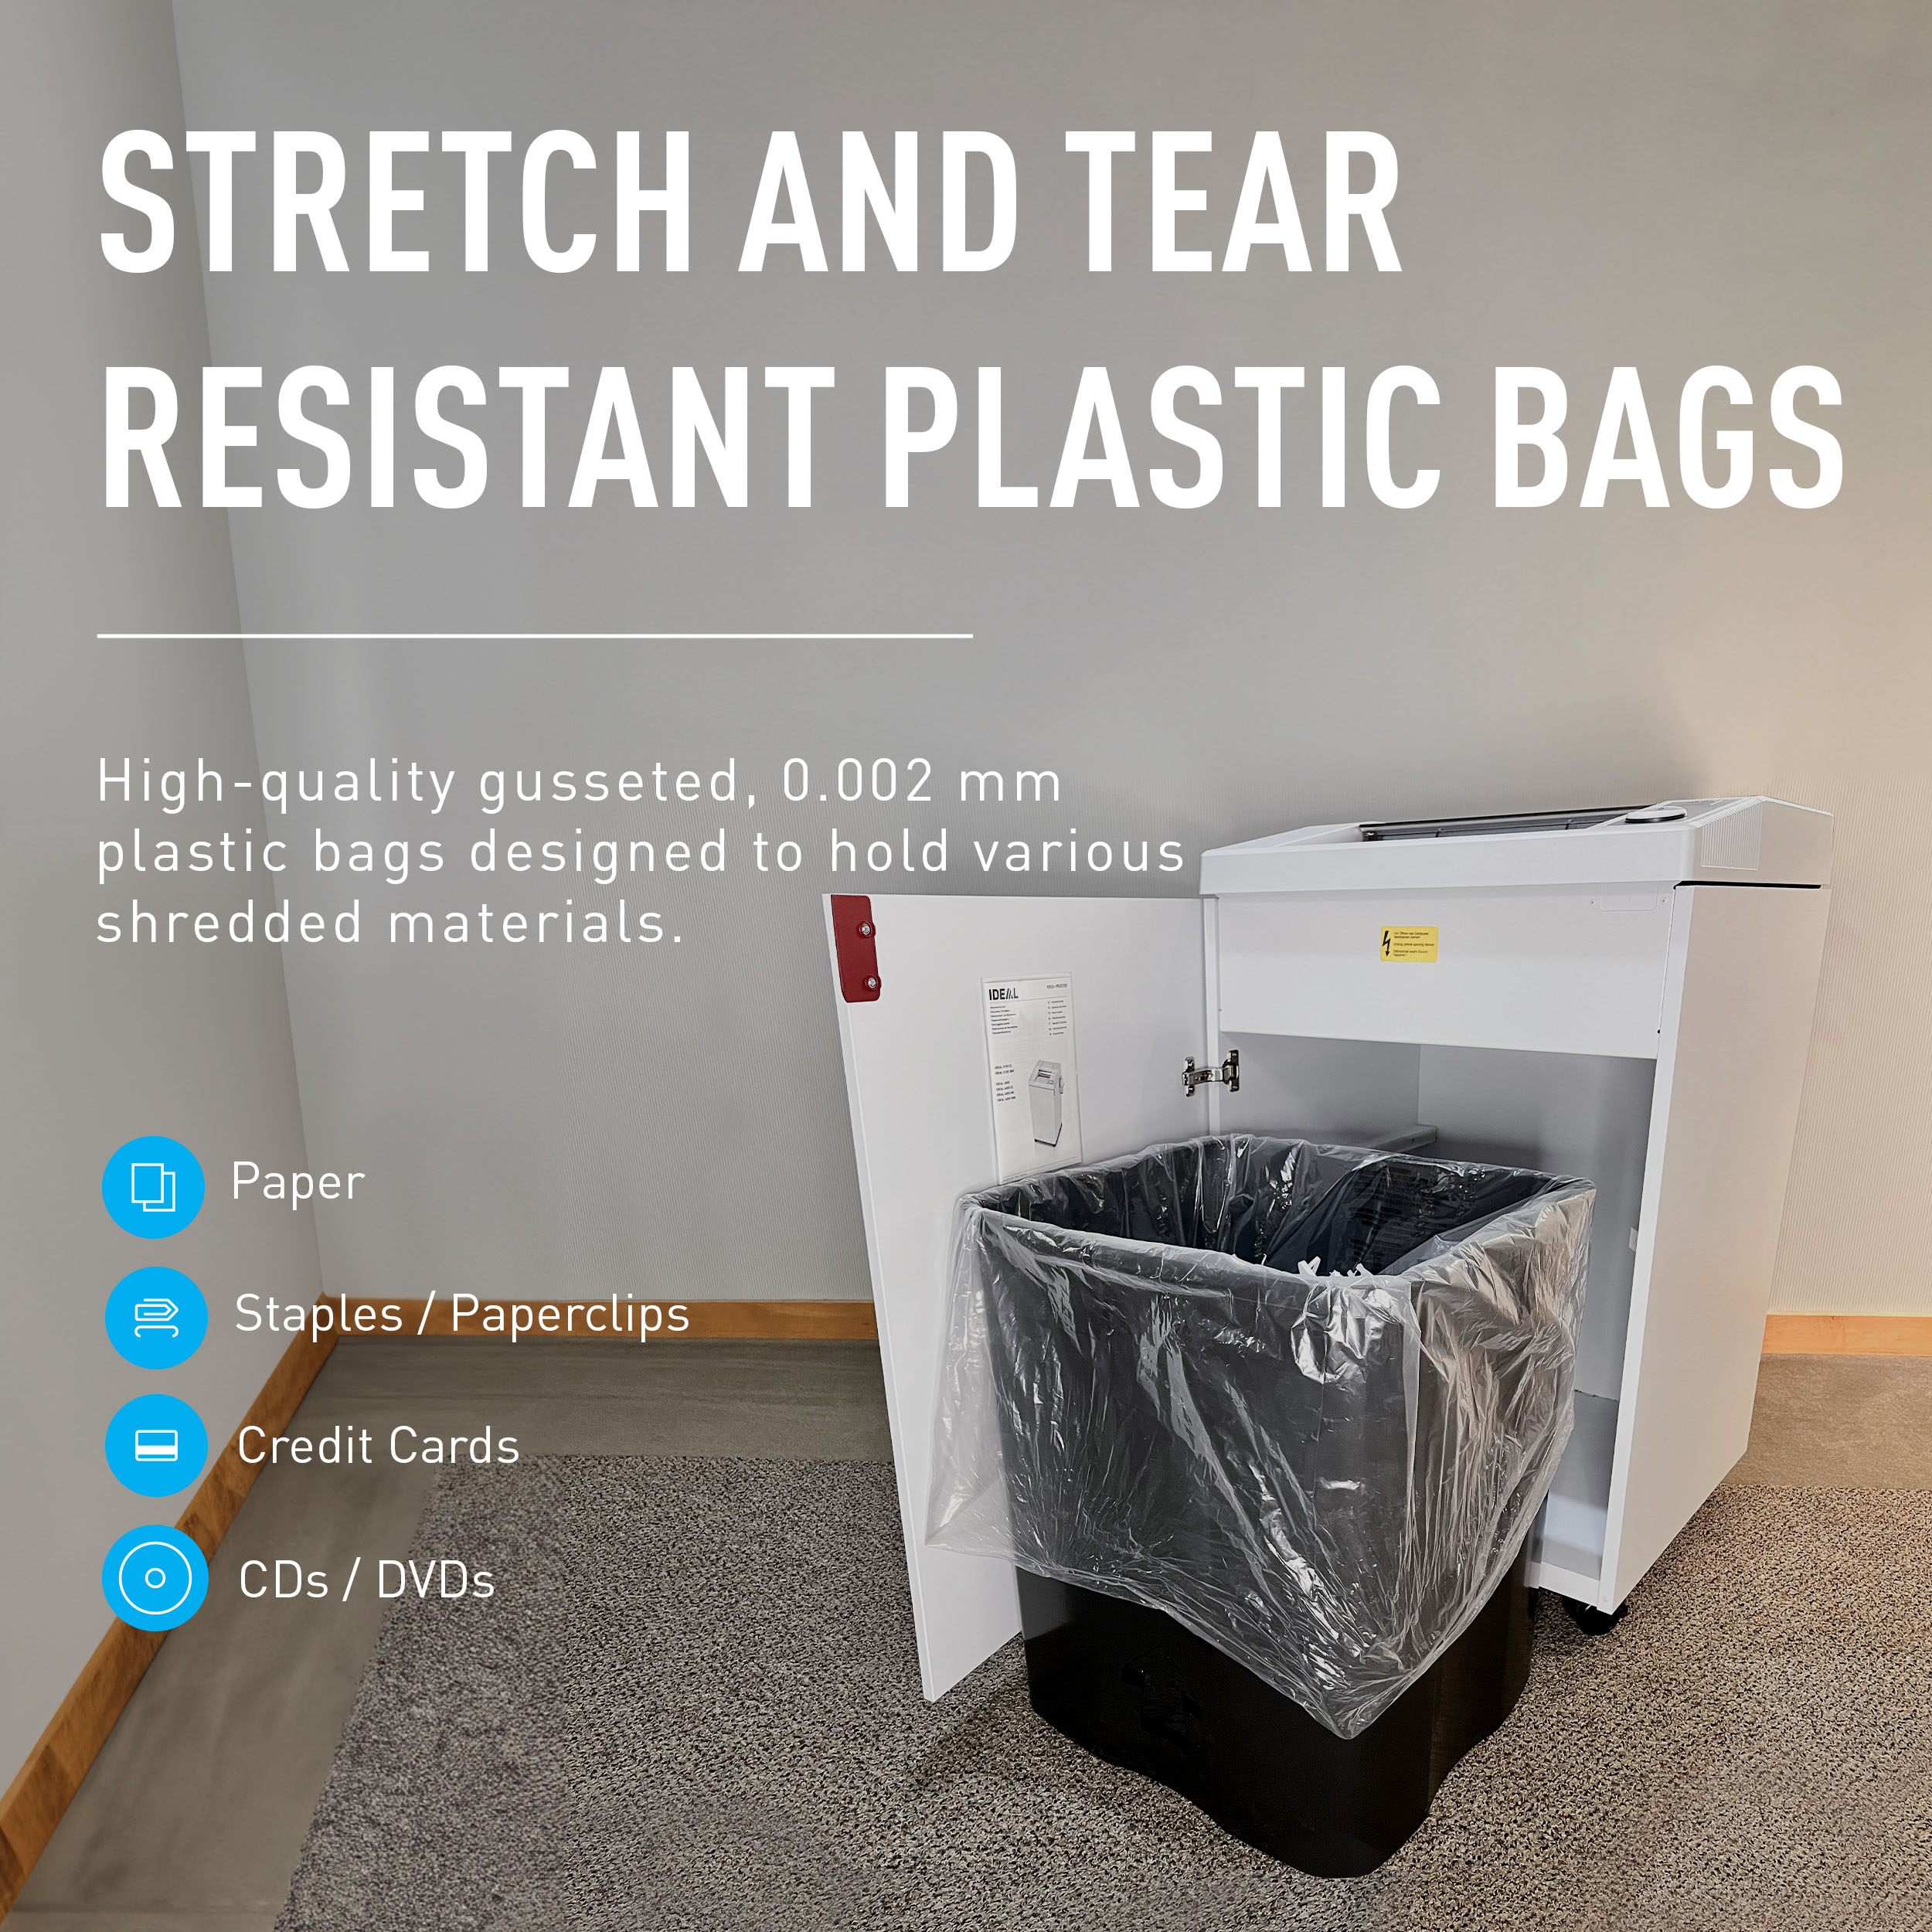 ideal Shredder Bags, 40” x 48”, 56 Gallon Bag, Gusseted, Compatible with ideal Shredder Models 3105, 3804, 4002, 4005, 4605, 4606 - image 5 of 5